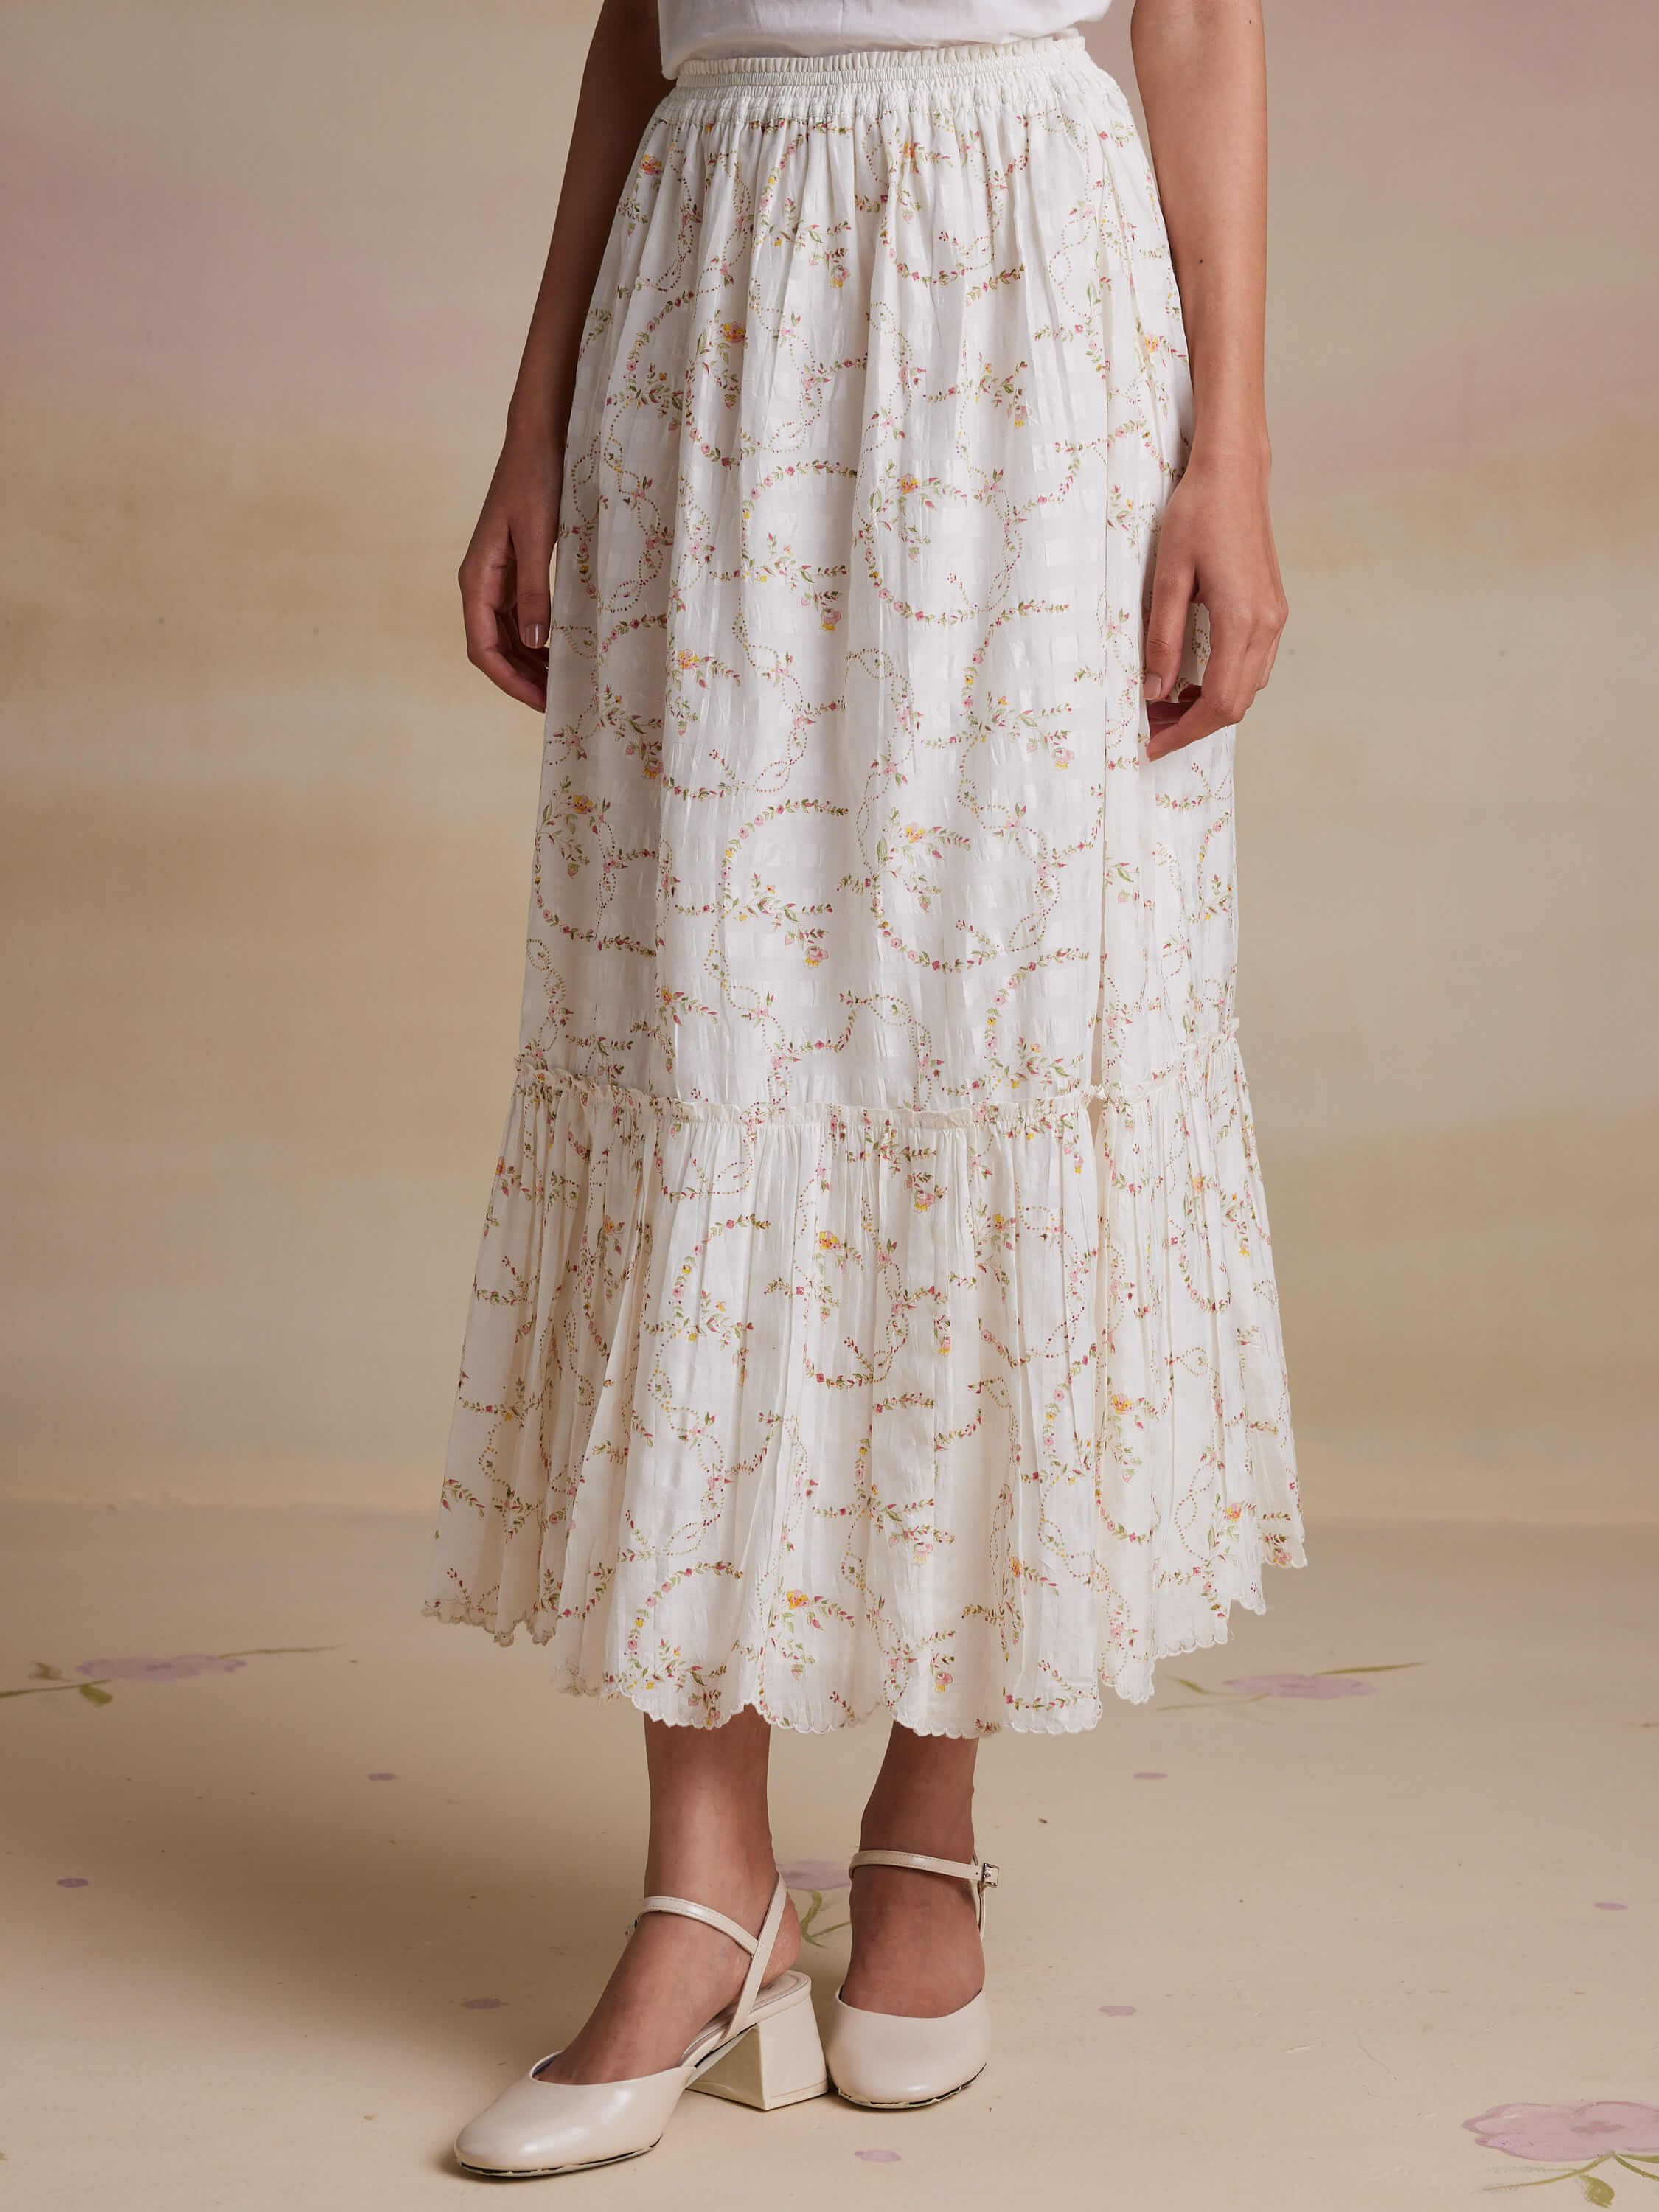 Woman wearing a white floral embroidered midi skirt with white block heels.